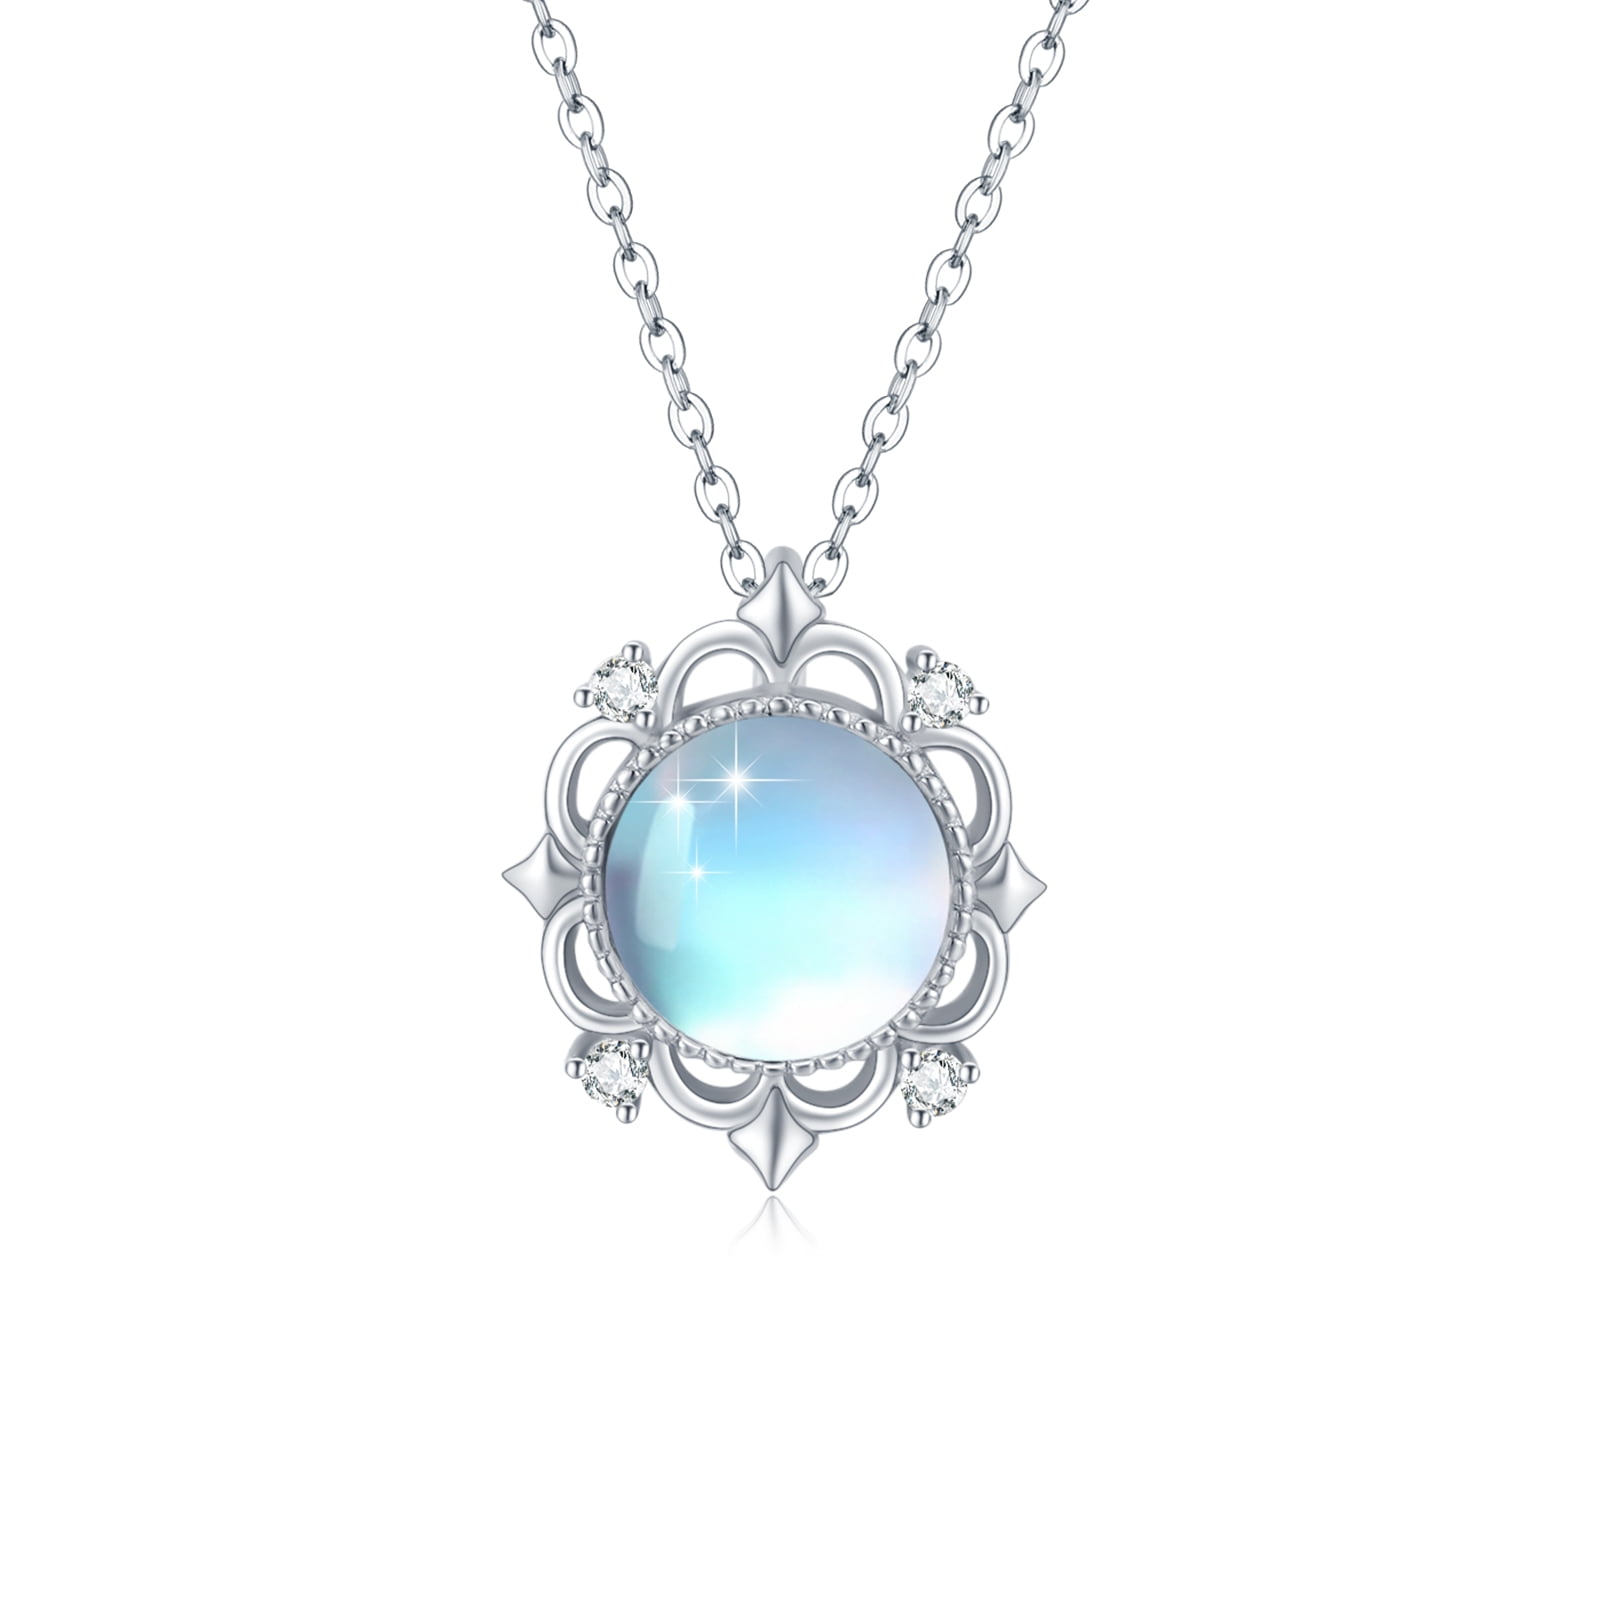 Cuoka Miracle Moonstone Necklace For Women 925 Sterling Silver Necklace